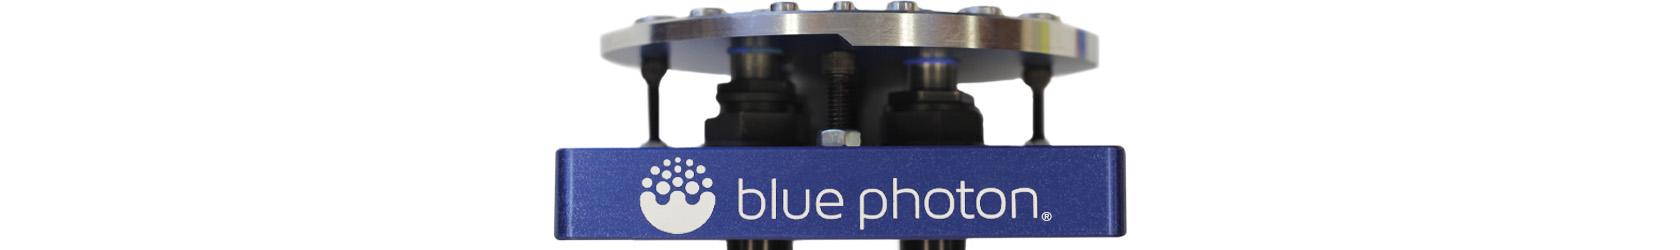 Photo of a Blue Photon UV-activated adhesive workholding system setup for prototyping, CNC, mass production, and more